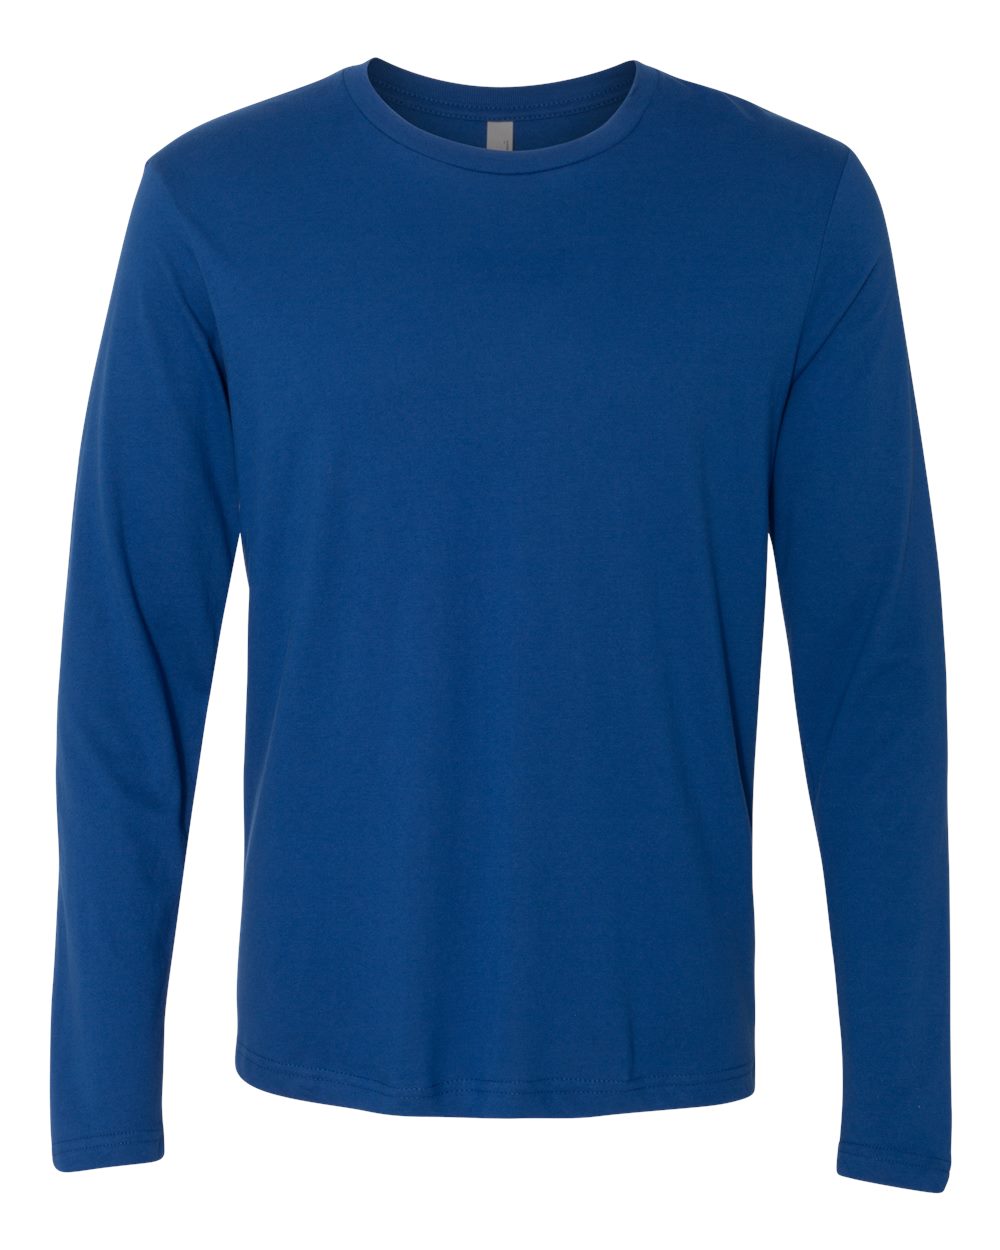 Next Level Long Sleeve (3601) in Royal